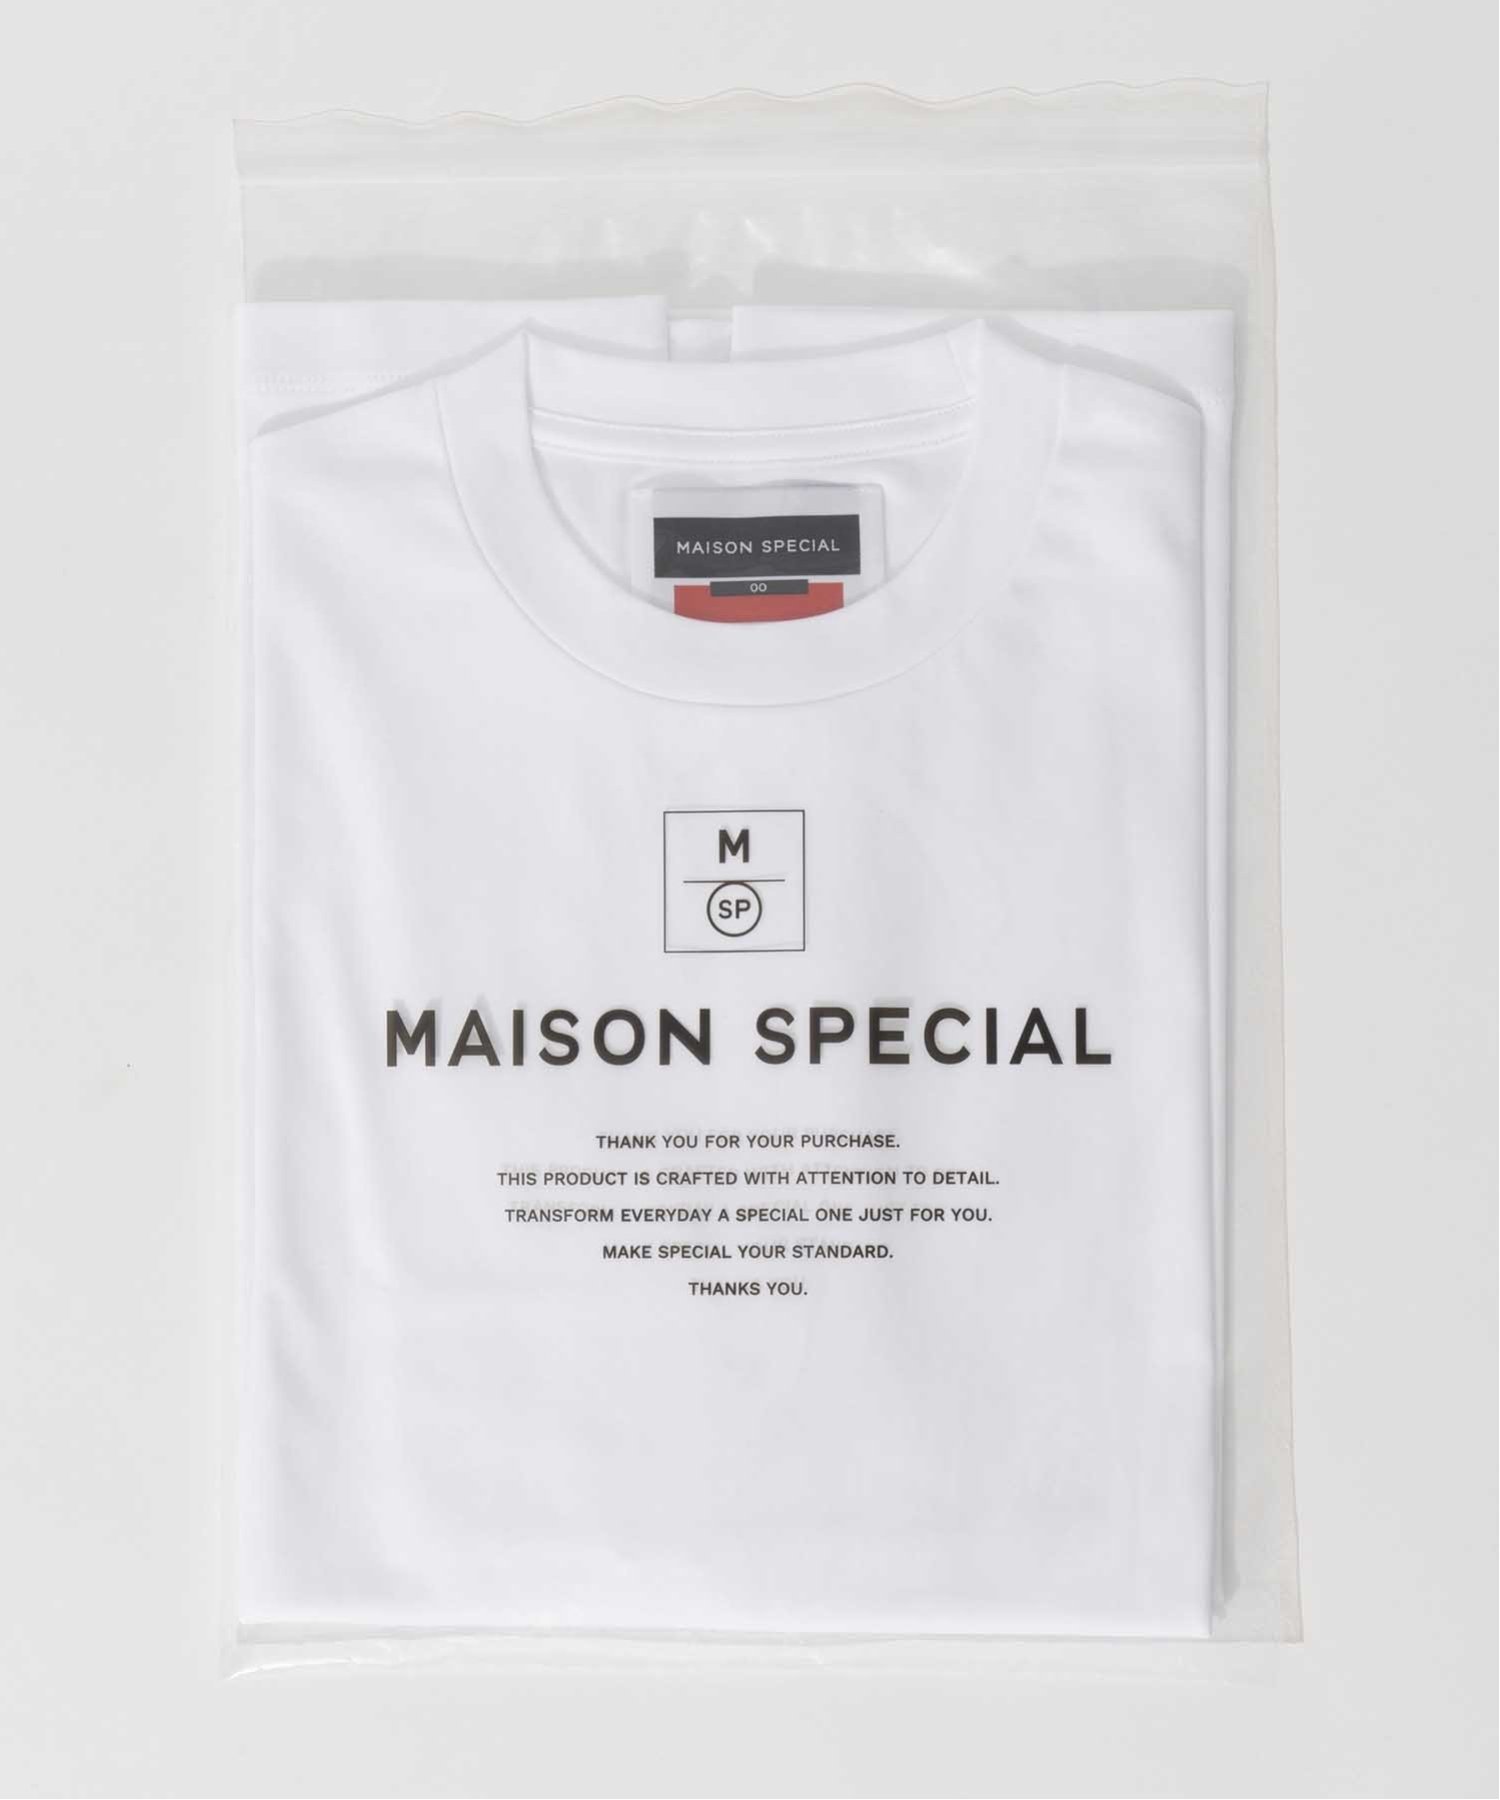 MAISON SPECIAL｜《ユニセックスアイテム》【PACKING】スーピマ